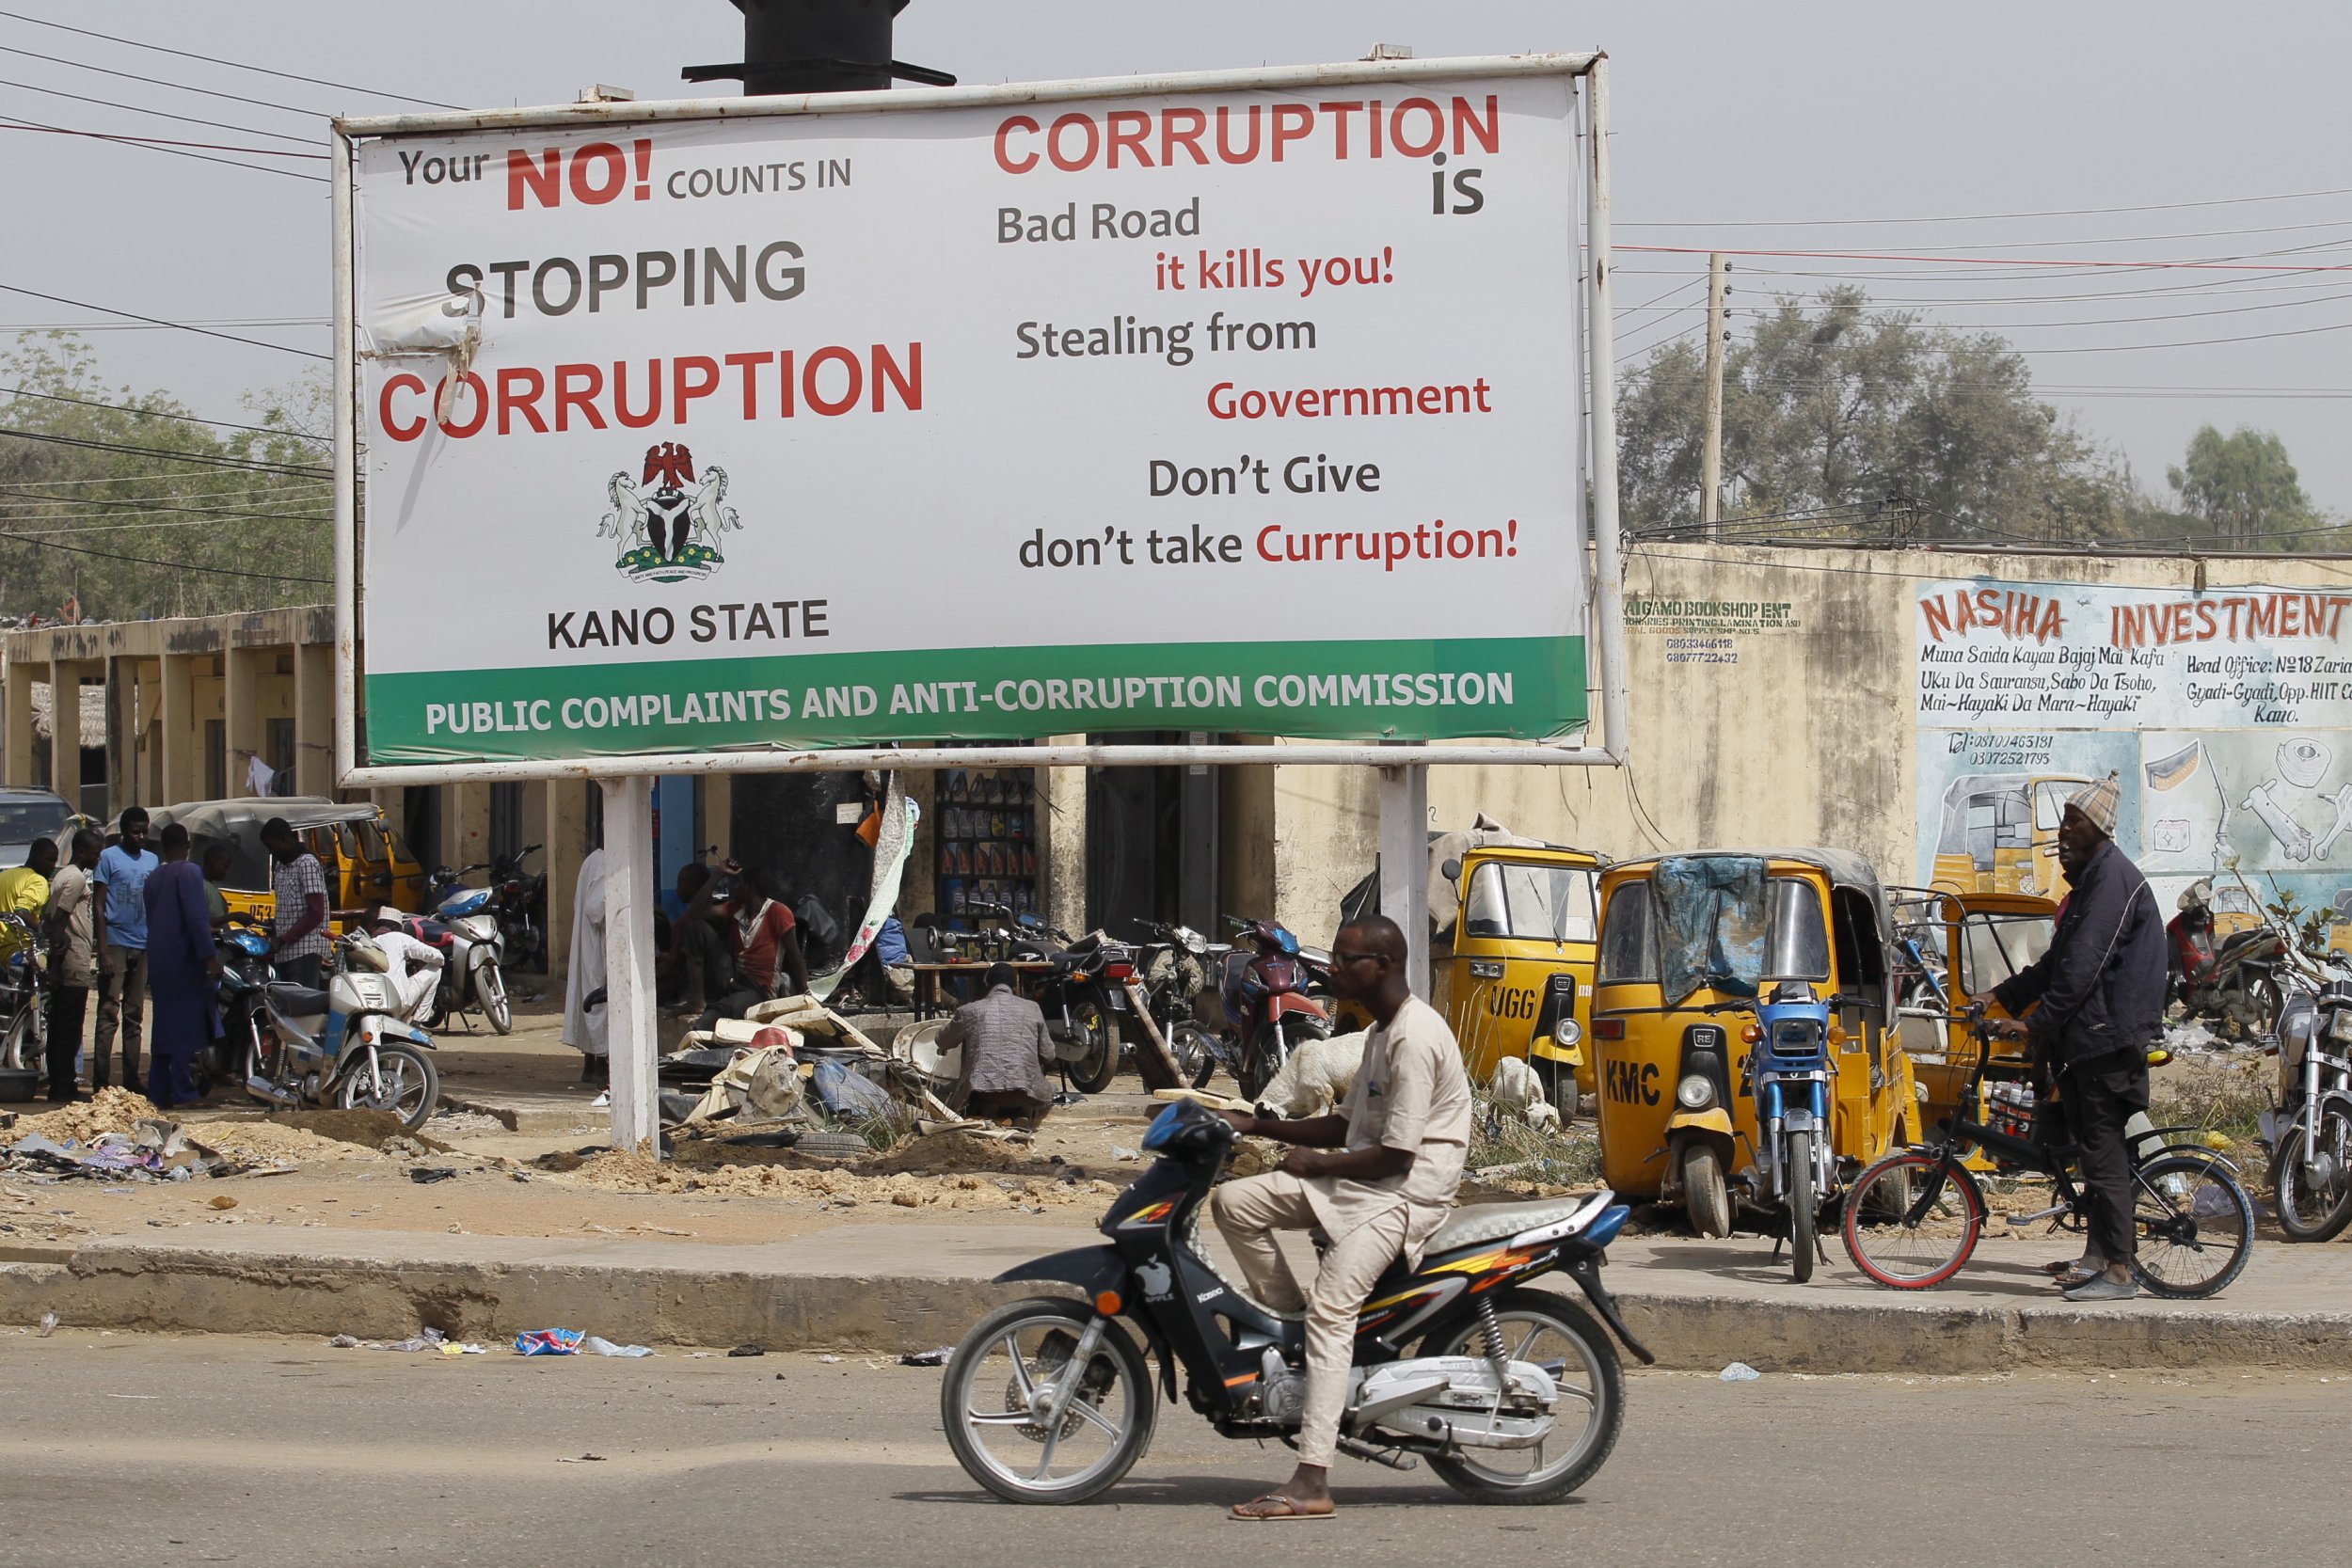 A motorcyclist sits near an anti-corruption sign in Kano, Nigeria.